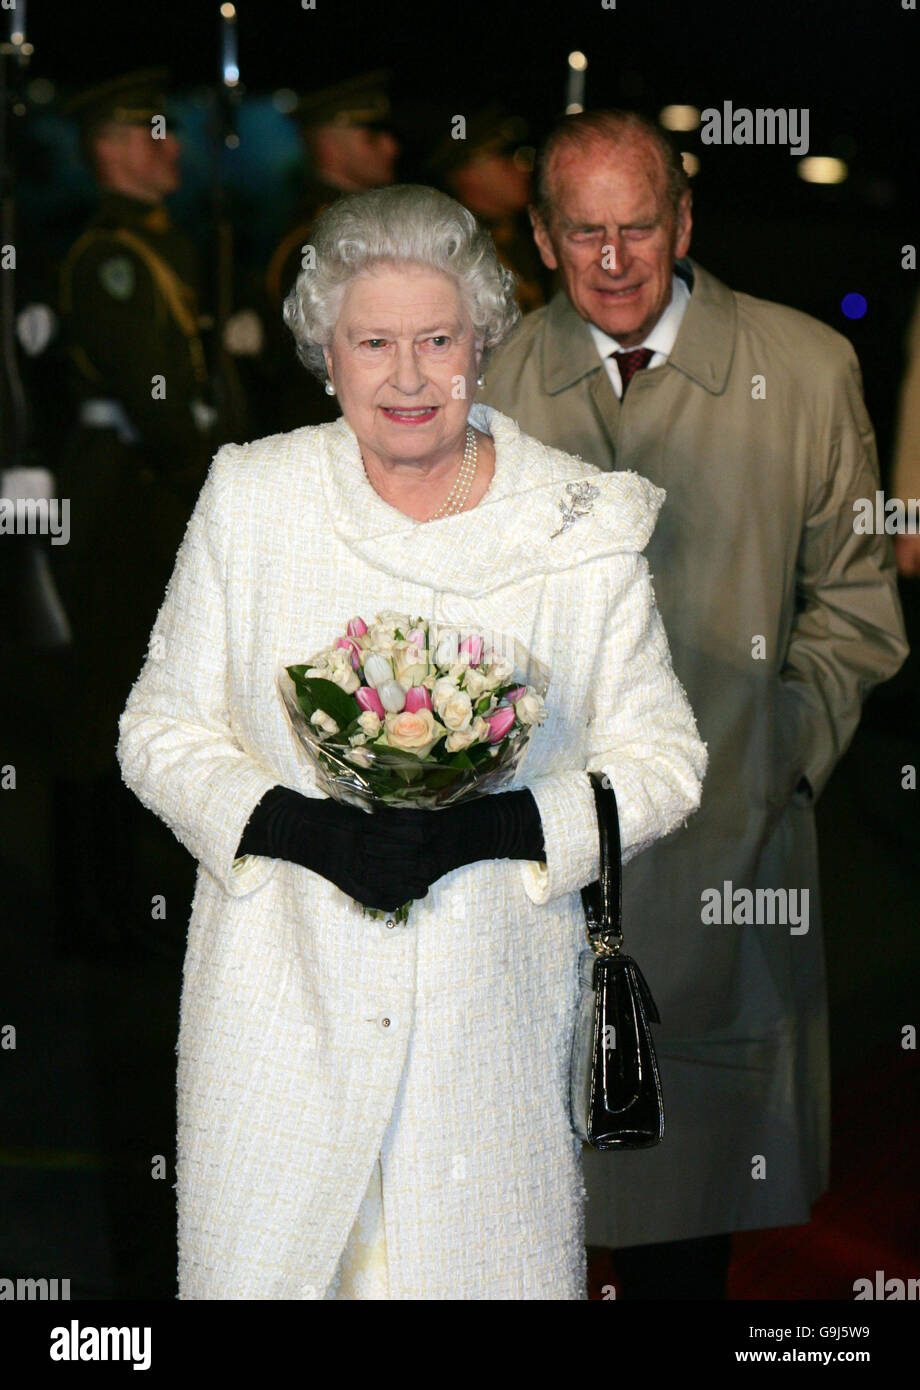 Royalty - Queen Elizabeth II State Visit to Lithuania Stock Photo - Alamy